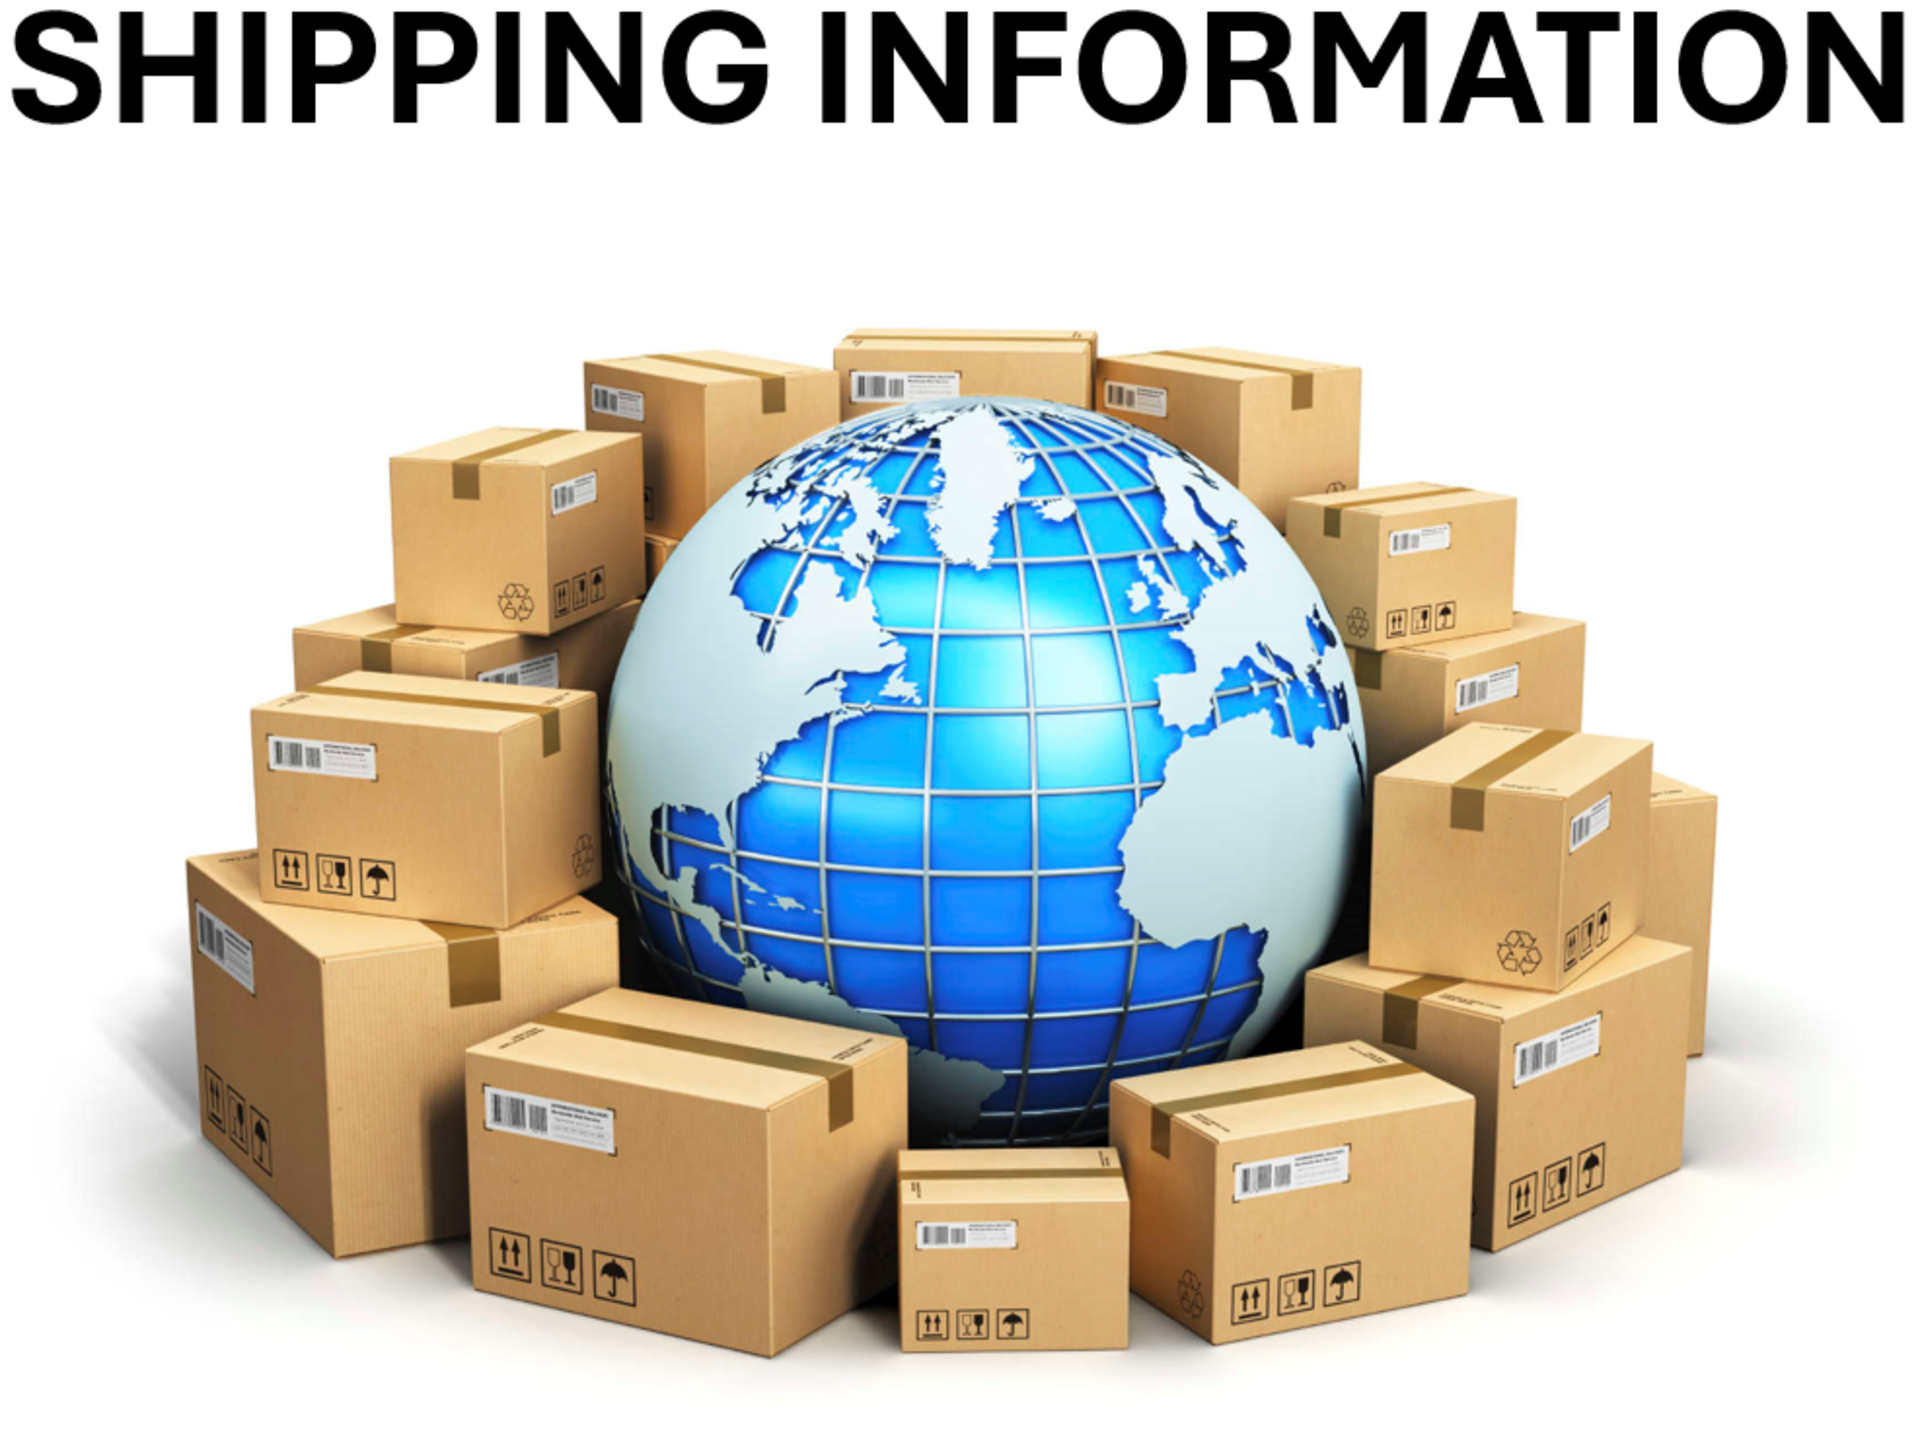 SHIPPING INFORMATION!